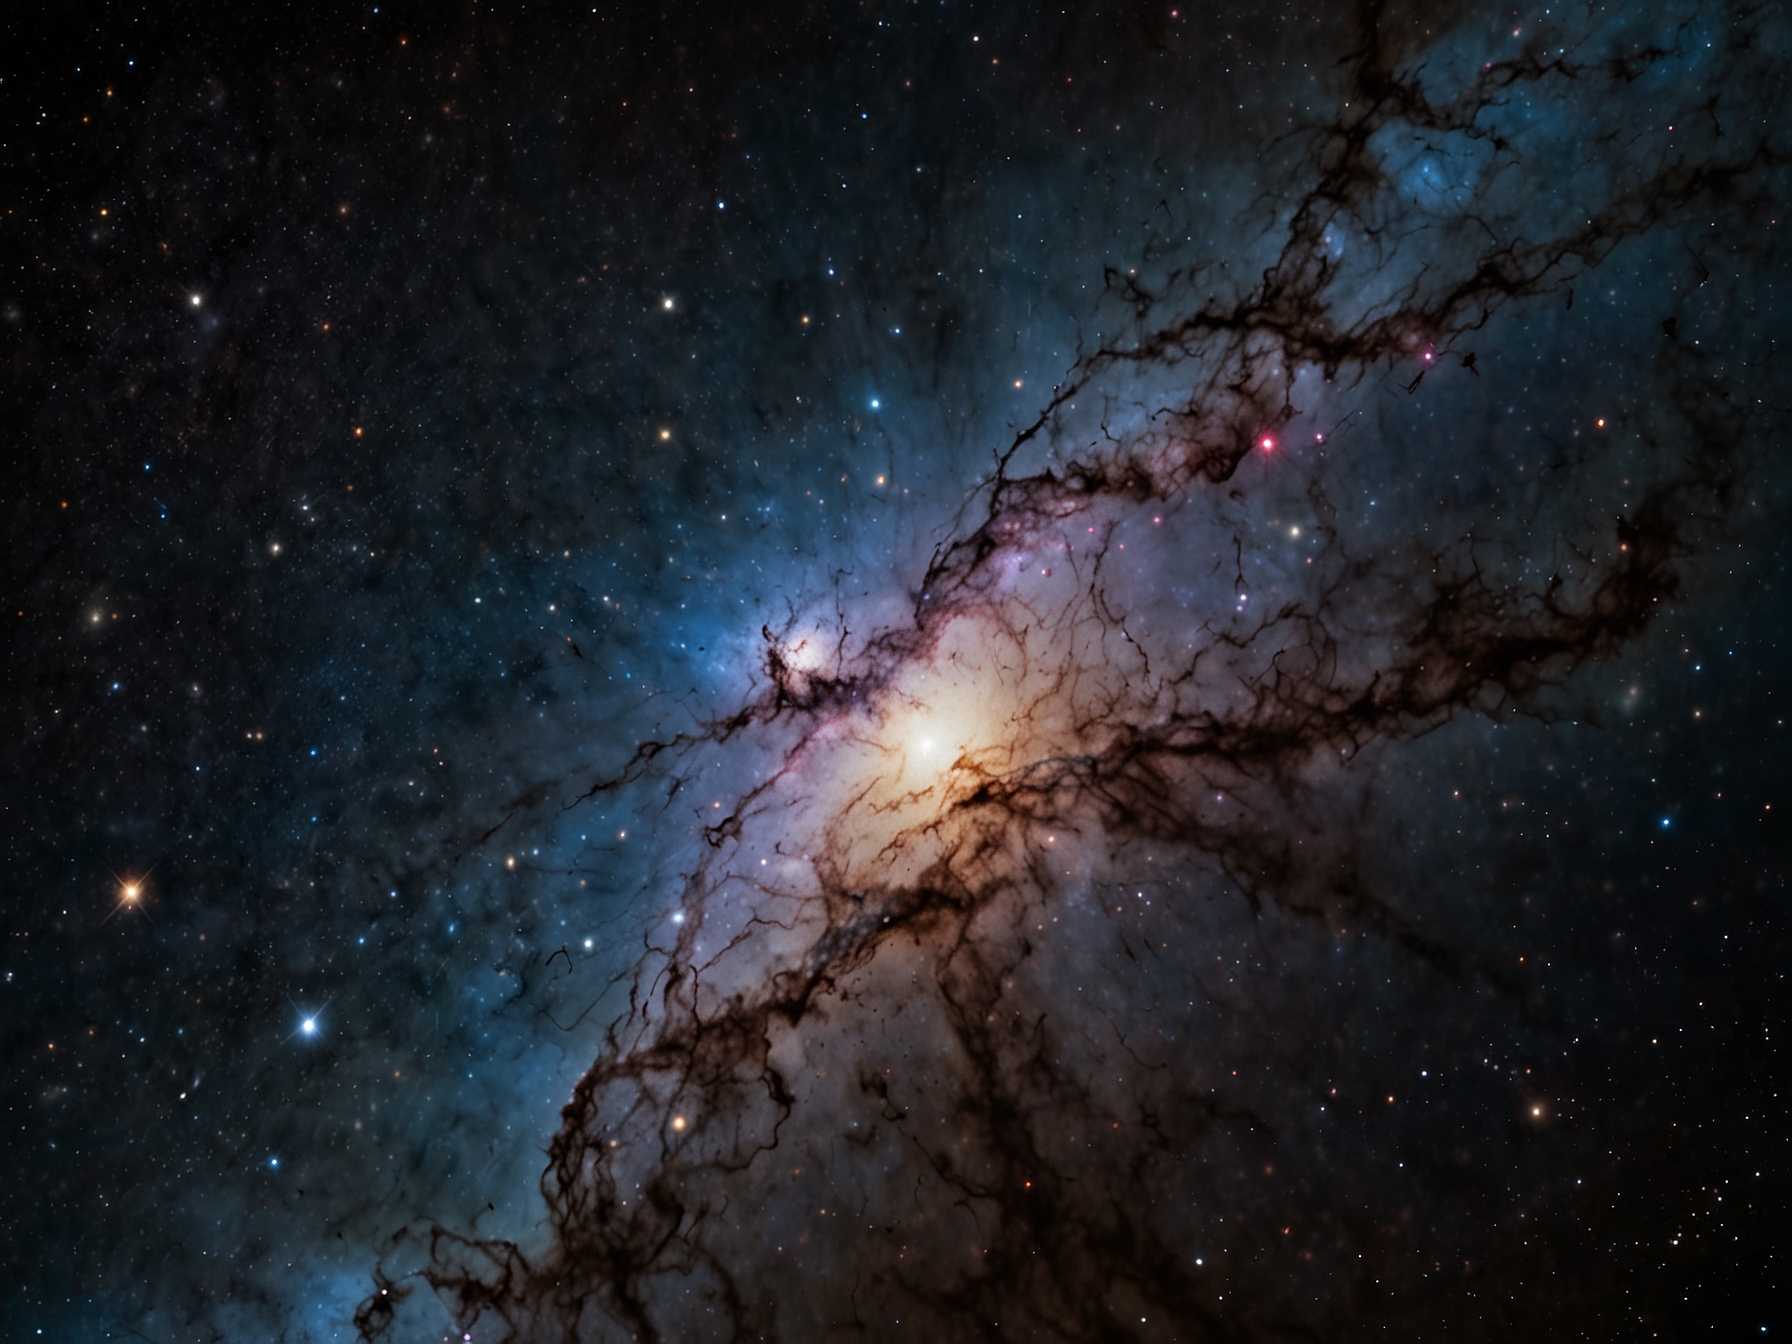 A breathtaking image of a vibrant nearby galaxy captured by Hubble, demonstrating the precision and effectiveness of its new pointing mode in overcoming recent technical challenges.